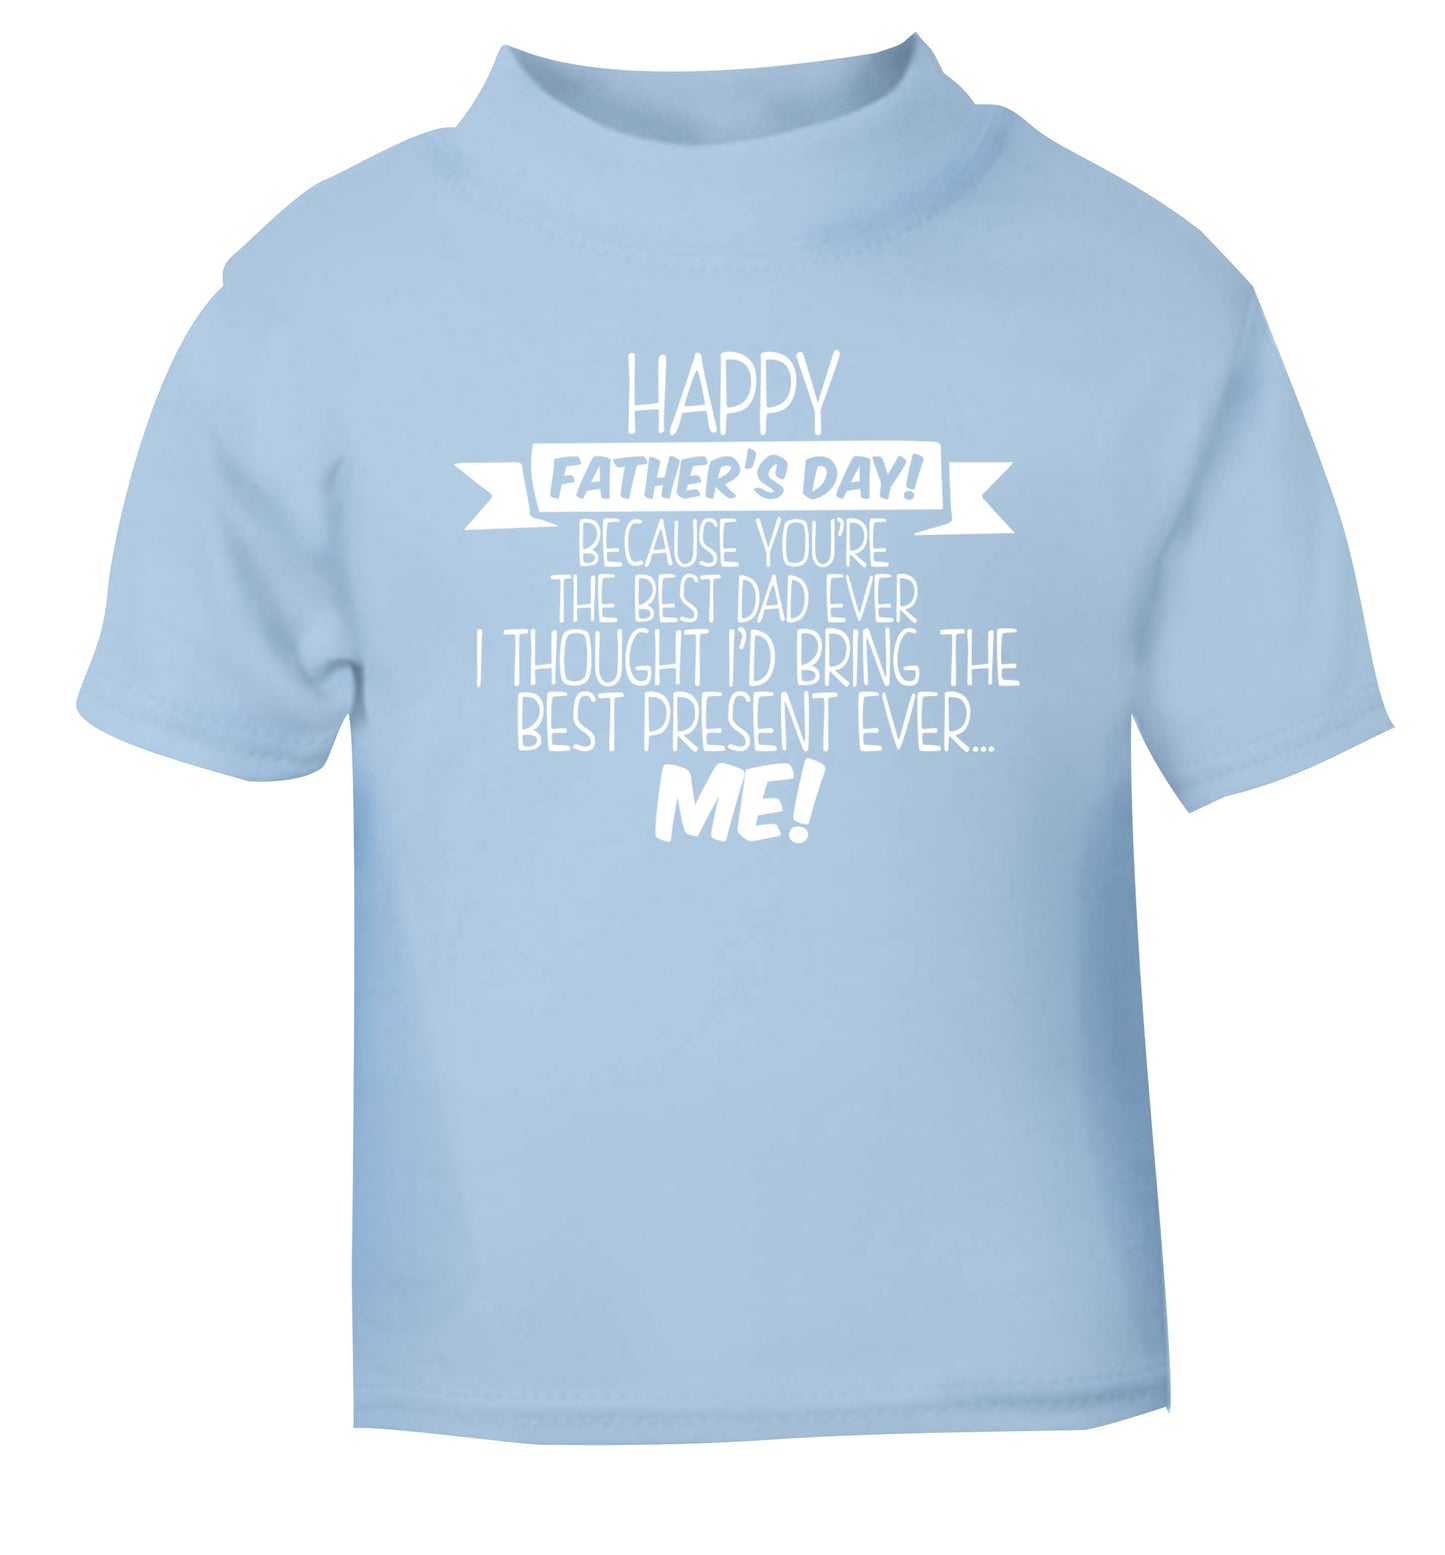 Happy Father's day, because you're the best dad ever I thought I'd bring the best present ever...me! light blue Baby Toddler Tshirt 2 Years